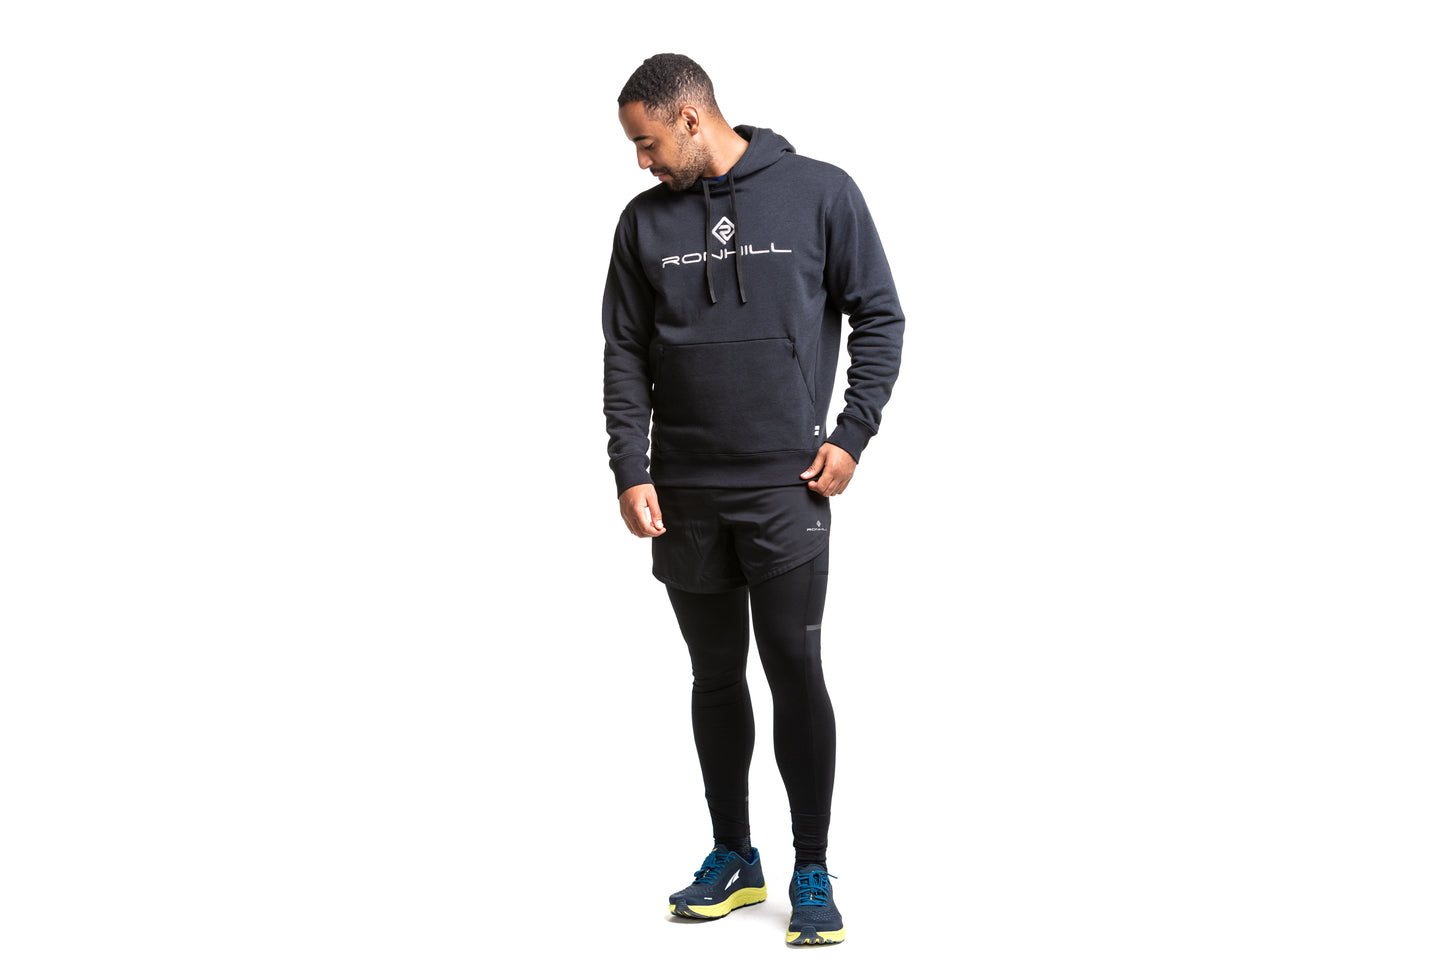 Ronhill Men's life PB hoody, black and limestone, on model, front view